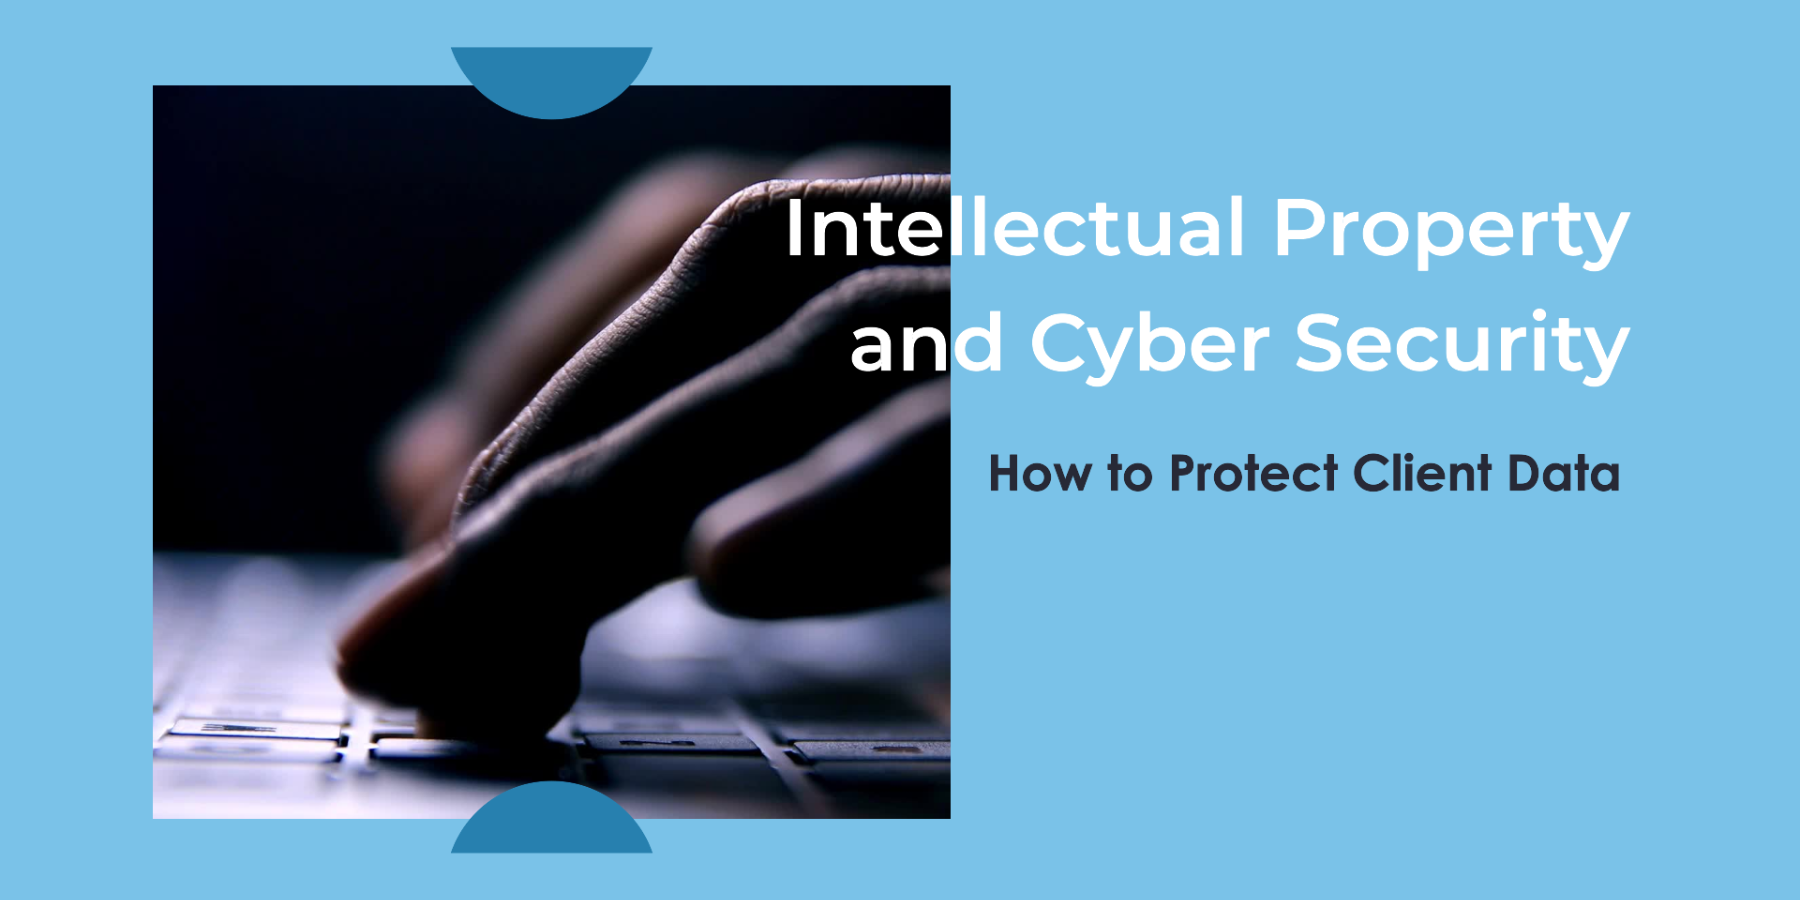 IP and cyber security